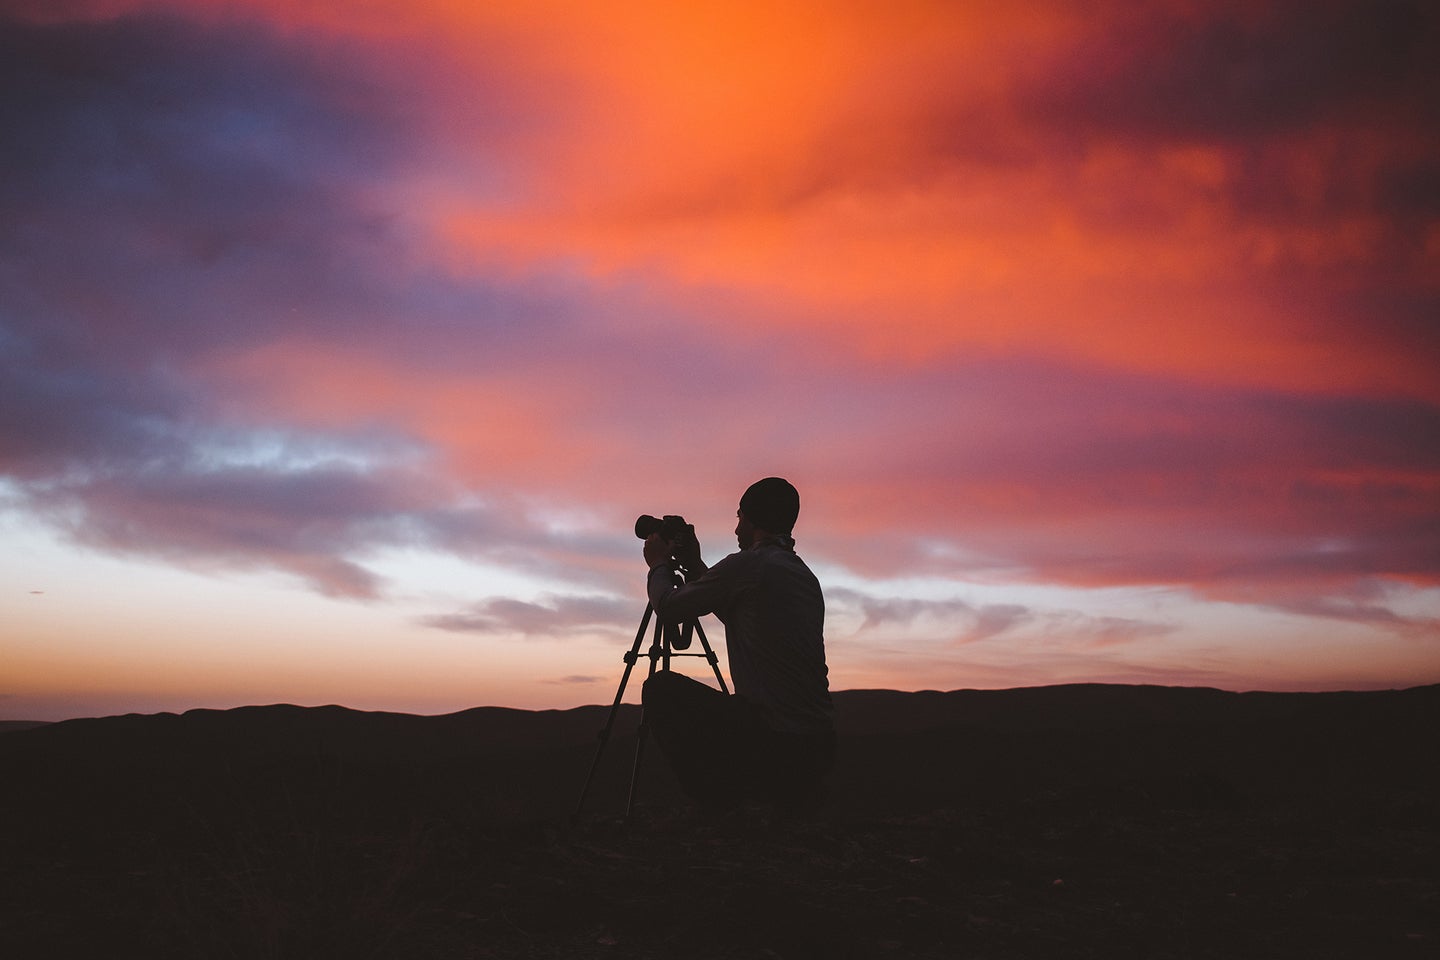 guy with a camera in a tripod with an organge and purple sky behind him